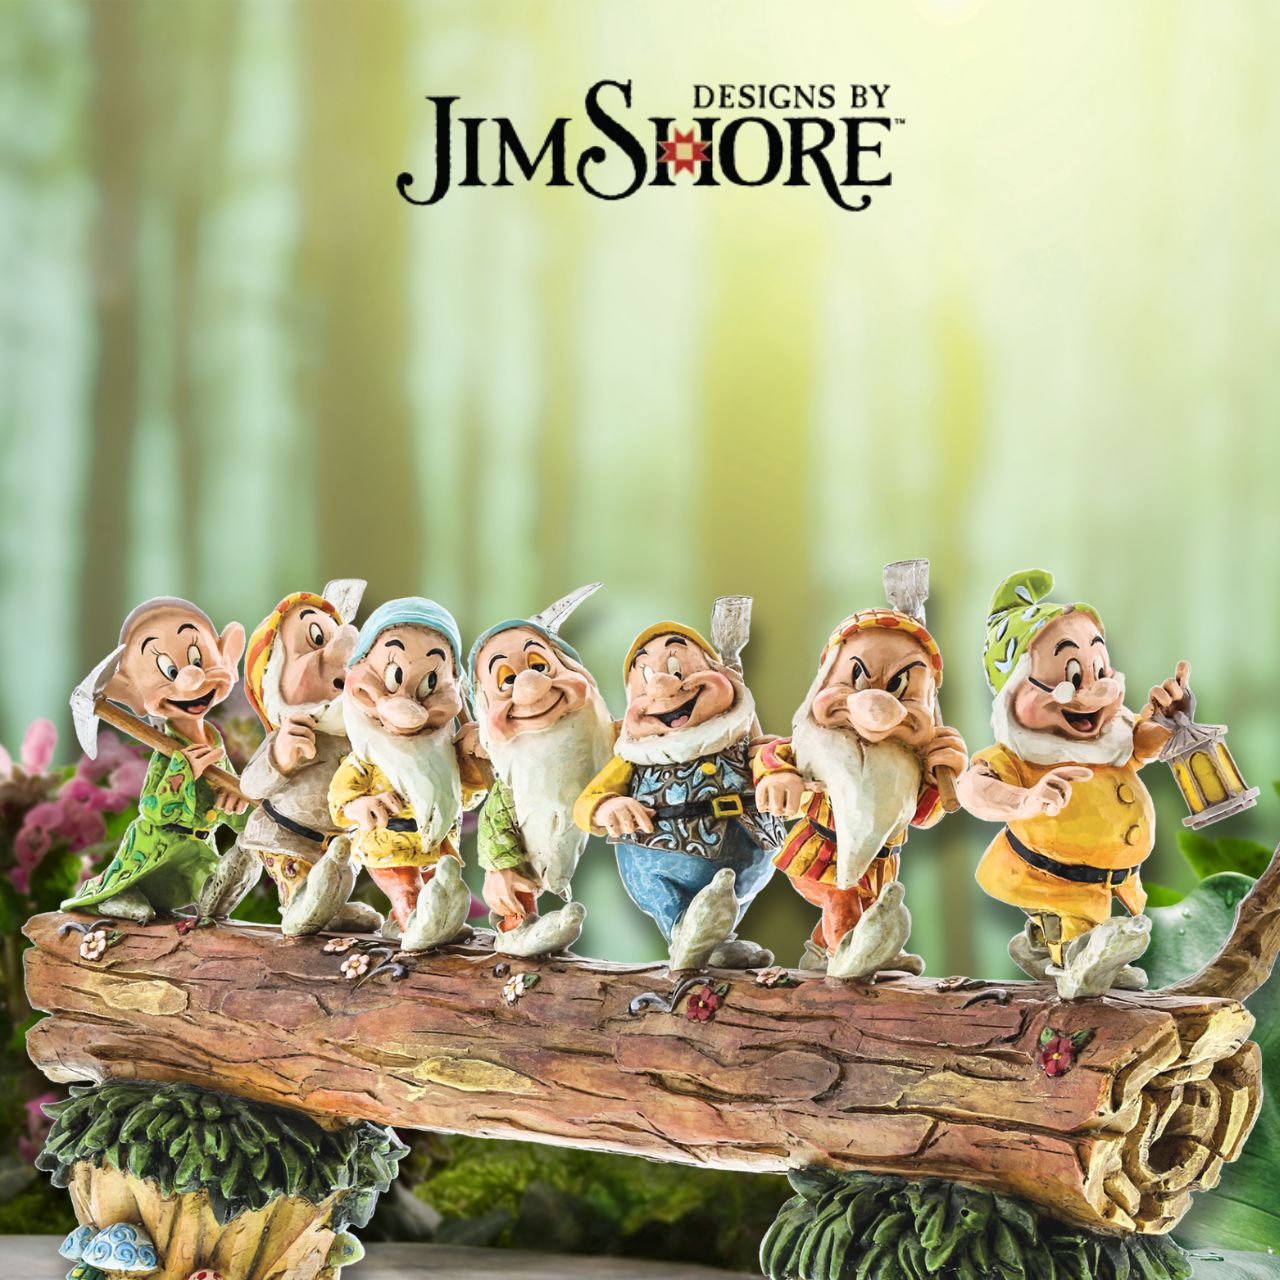 Homeward Bound captures a very memorable scene from the classic Snow White animation; the lovable 7 Dwarfs return home to find an unexpected house guest: a sleeping Princess. Designed by award winning artist and sculptor, Jim Shore for the Disney Traditions brand.